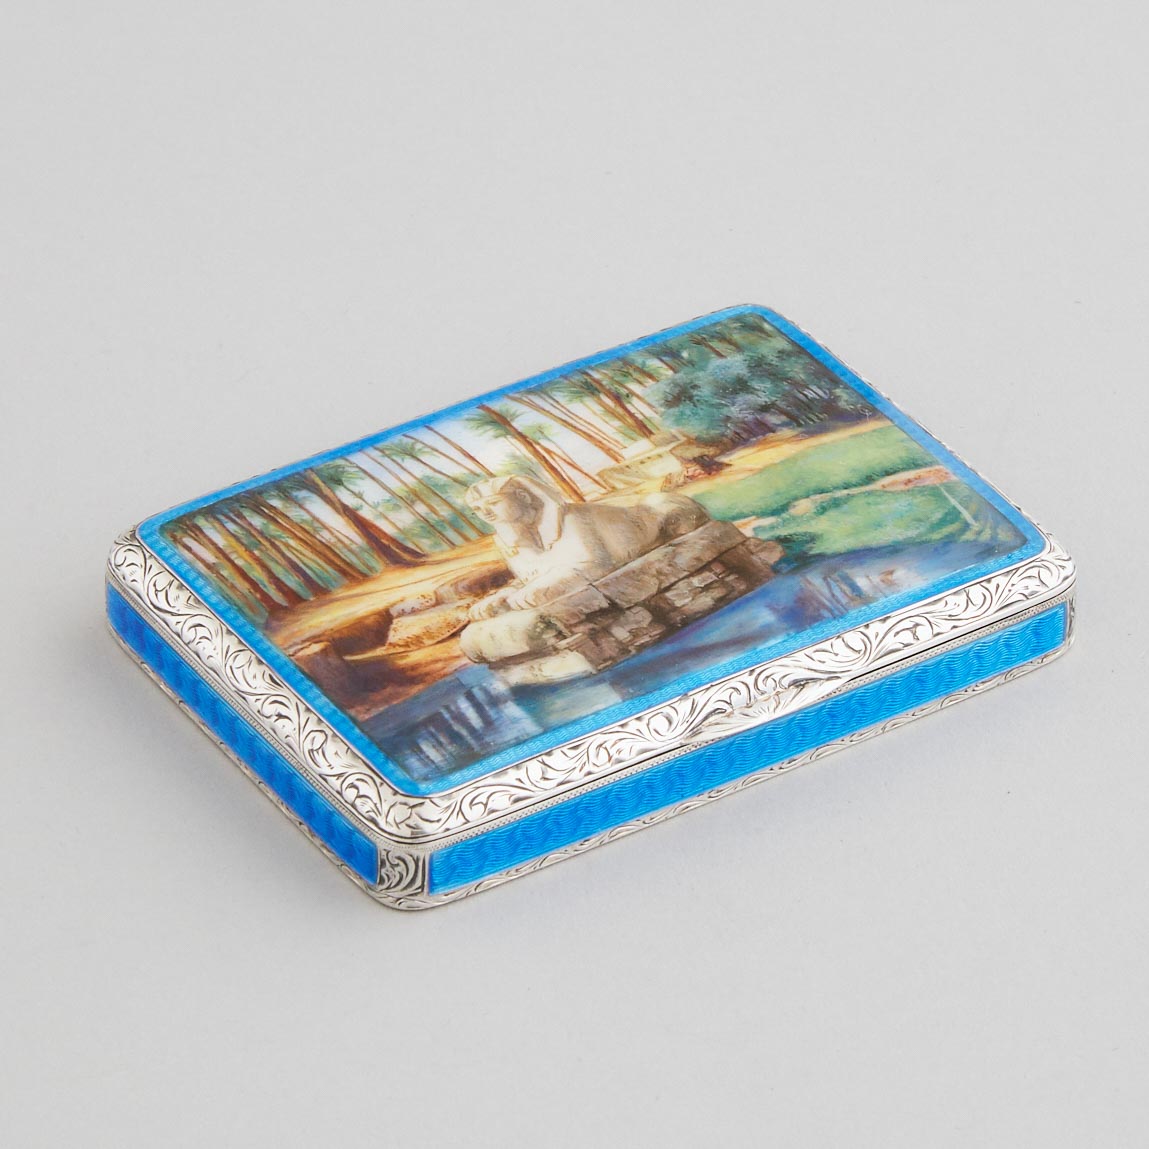 Continental Silver and Painted Guilloché Enamel 'Sphinx' Rectangular Box, early 20th century